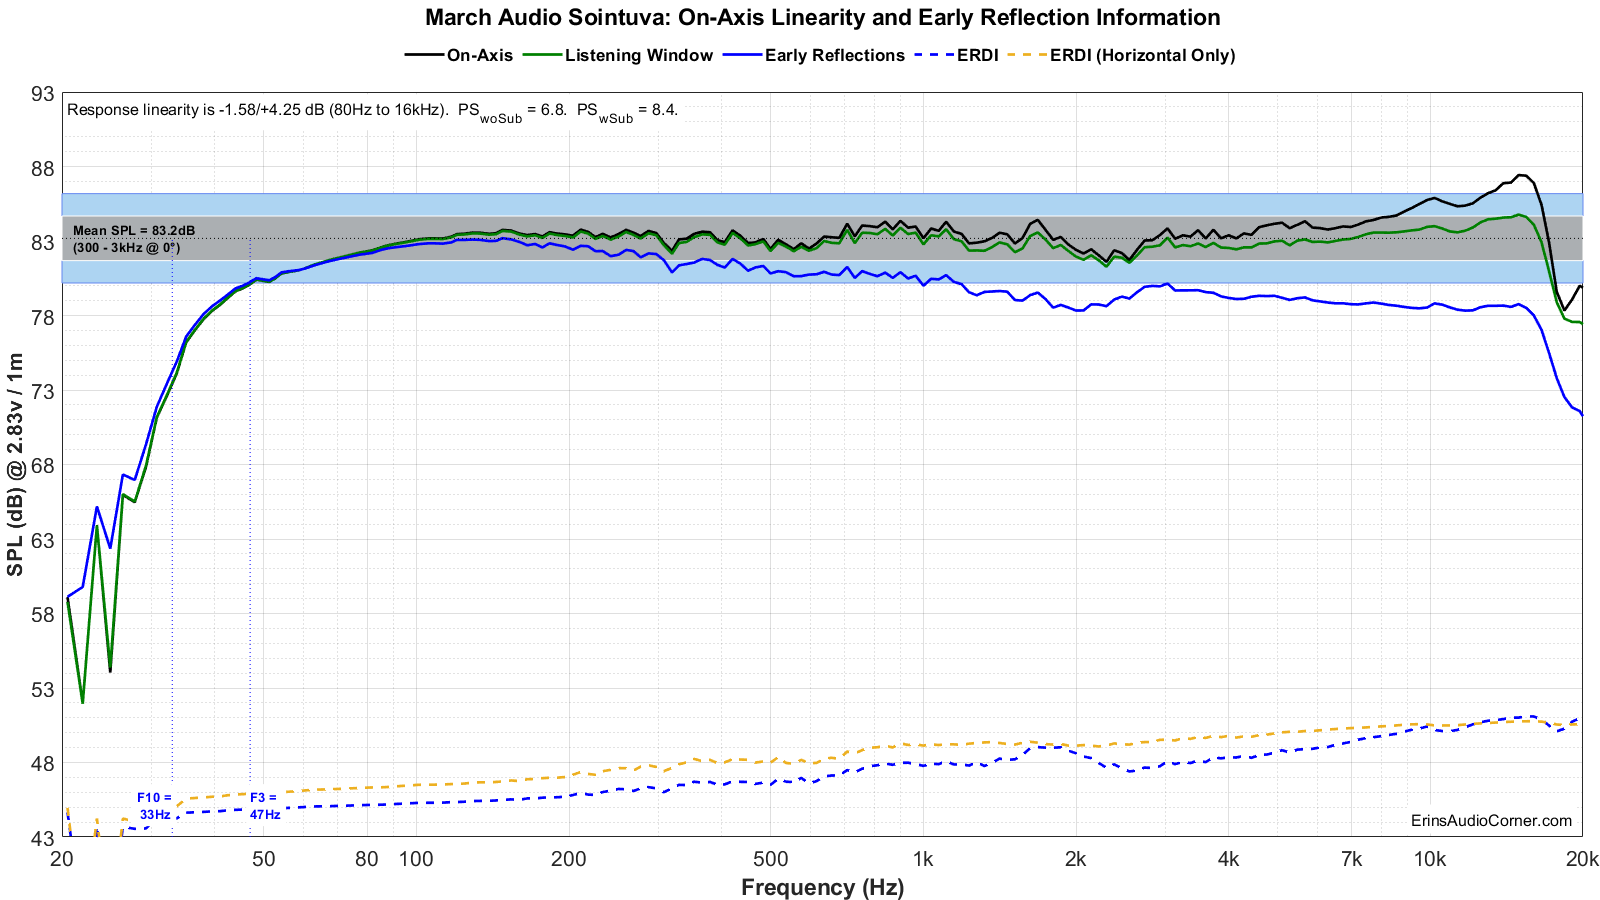 March Audio Sointuva FR_Linearity.png